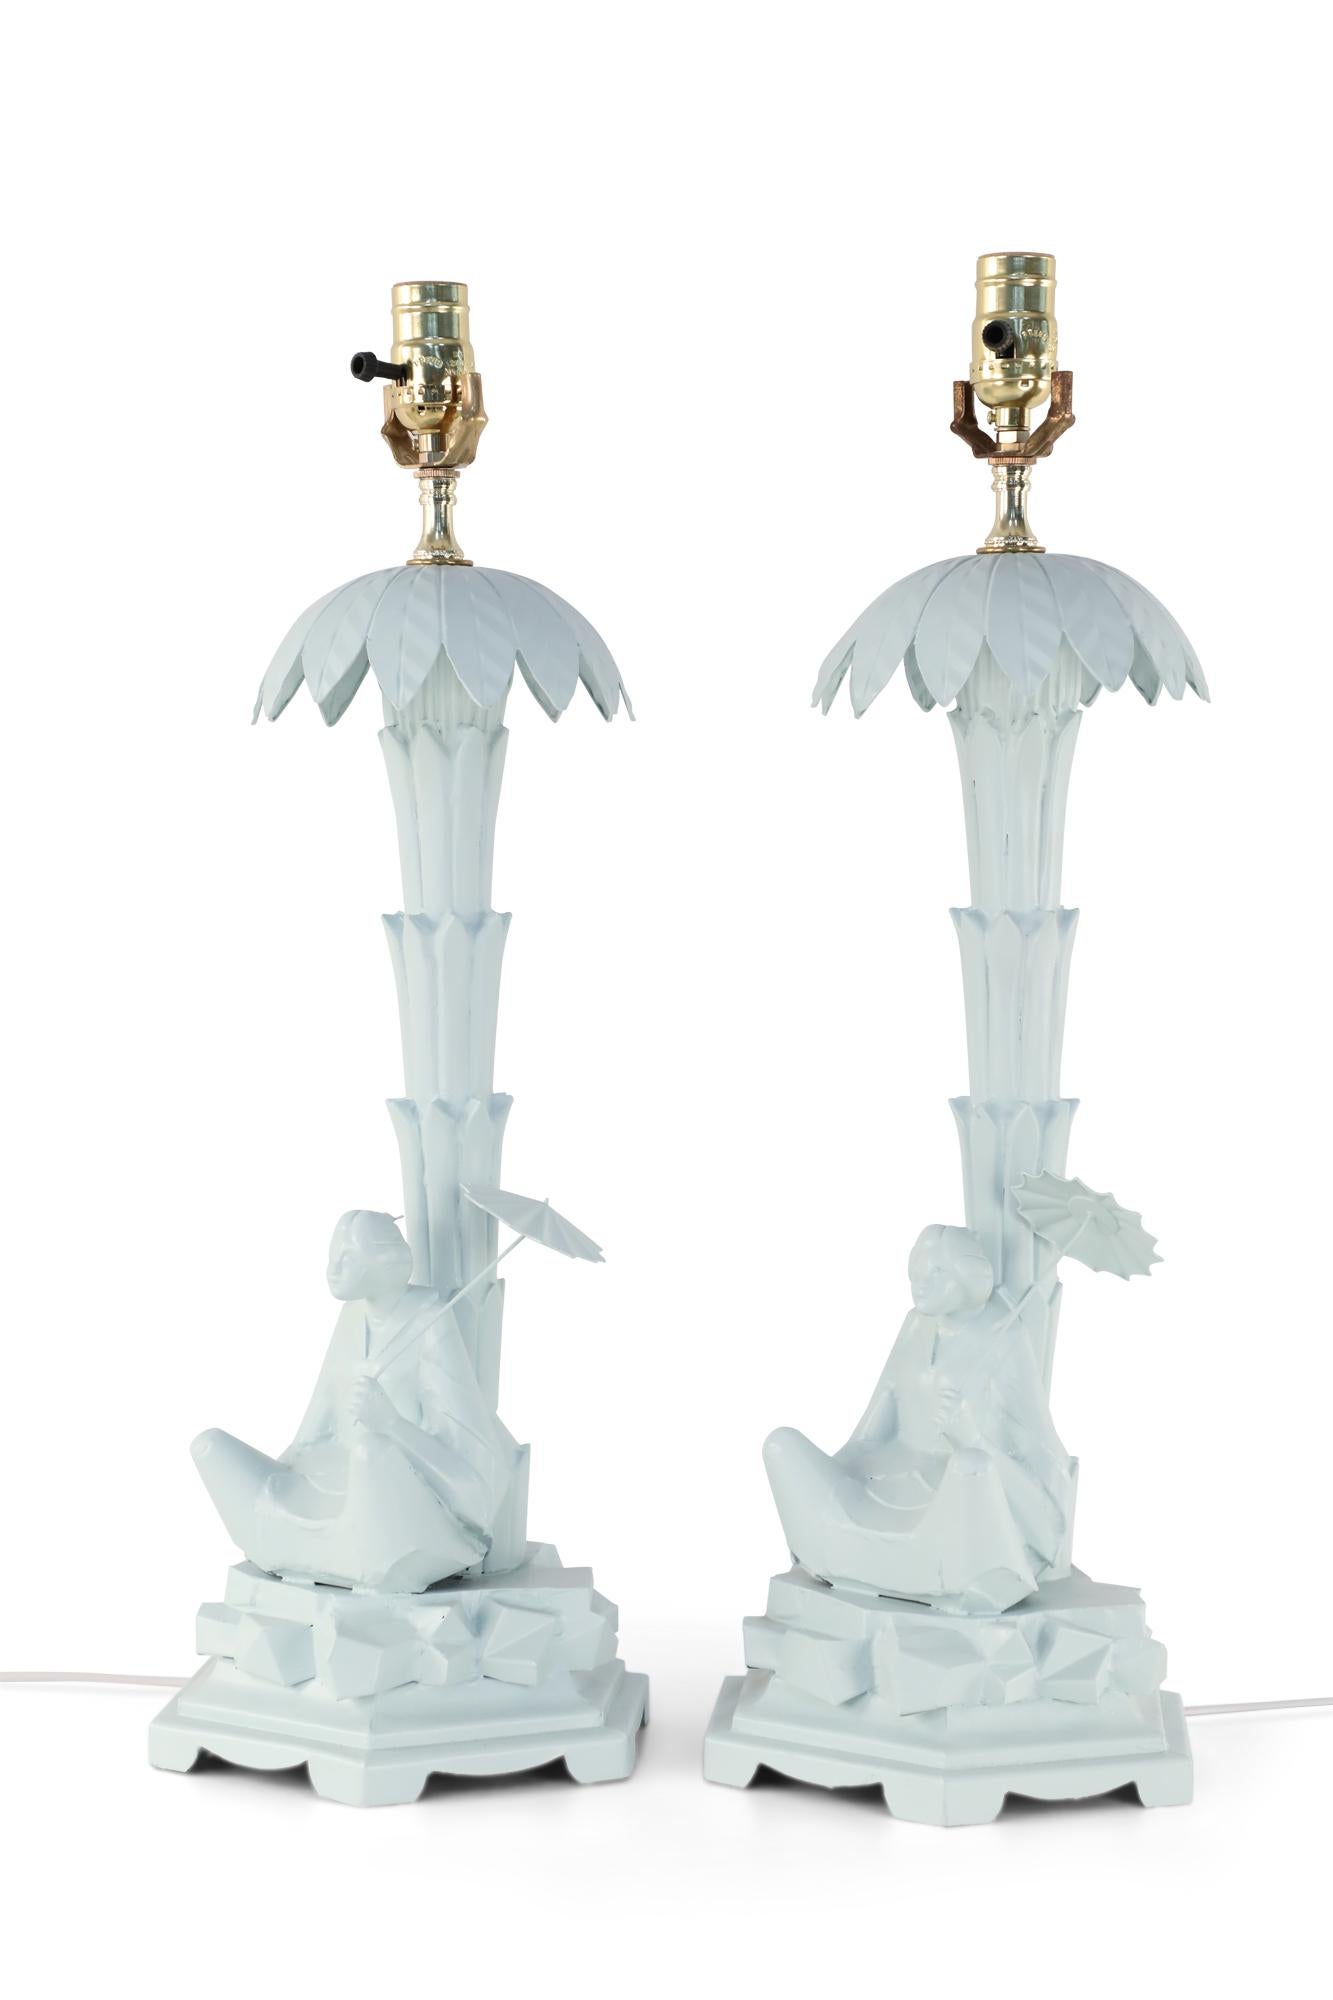 Pair of Chinese hand-made light blue tole table lamps depicting a woman holding an umbrella sitting in the shade of a palm tree.